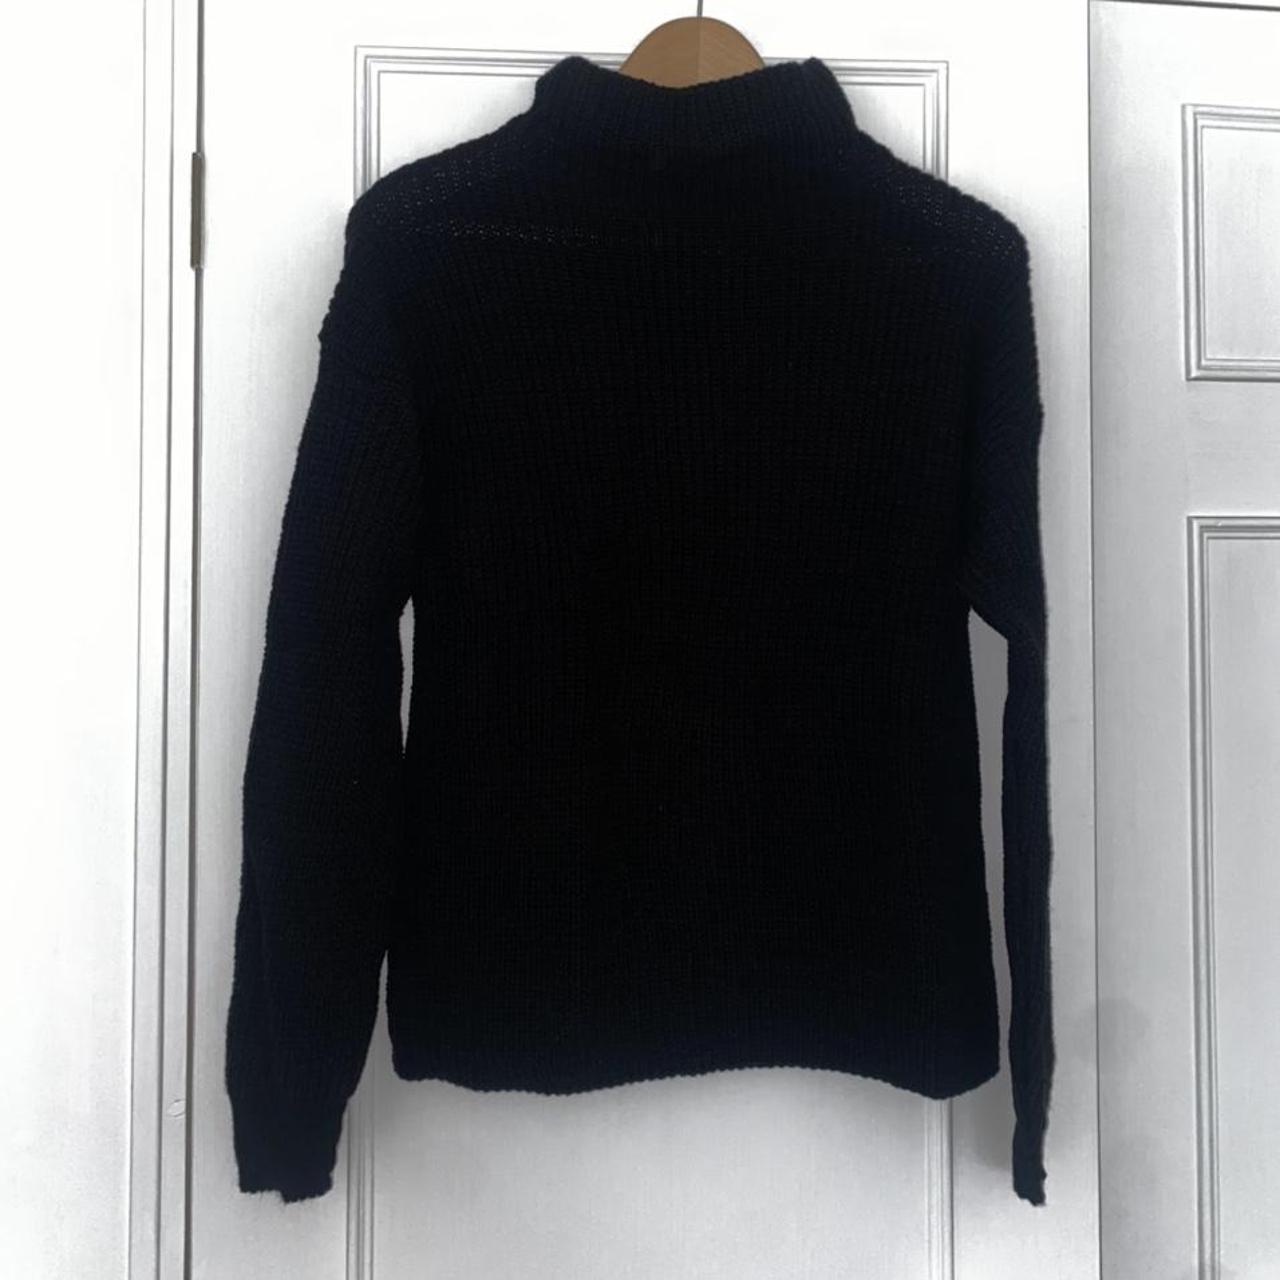 Womens PLT chunky knit black jumper with high neck.... - Depop